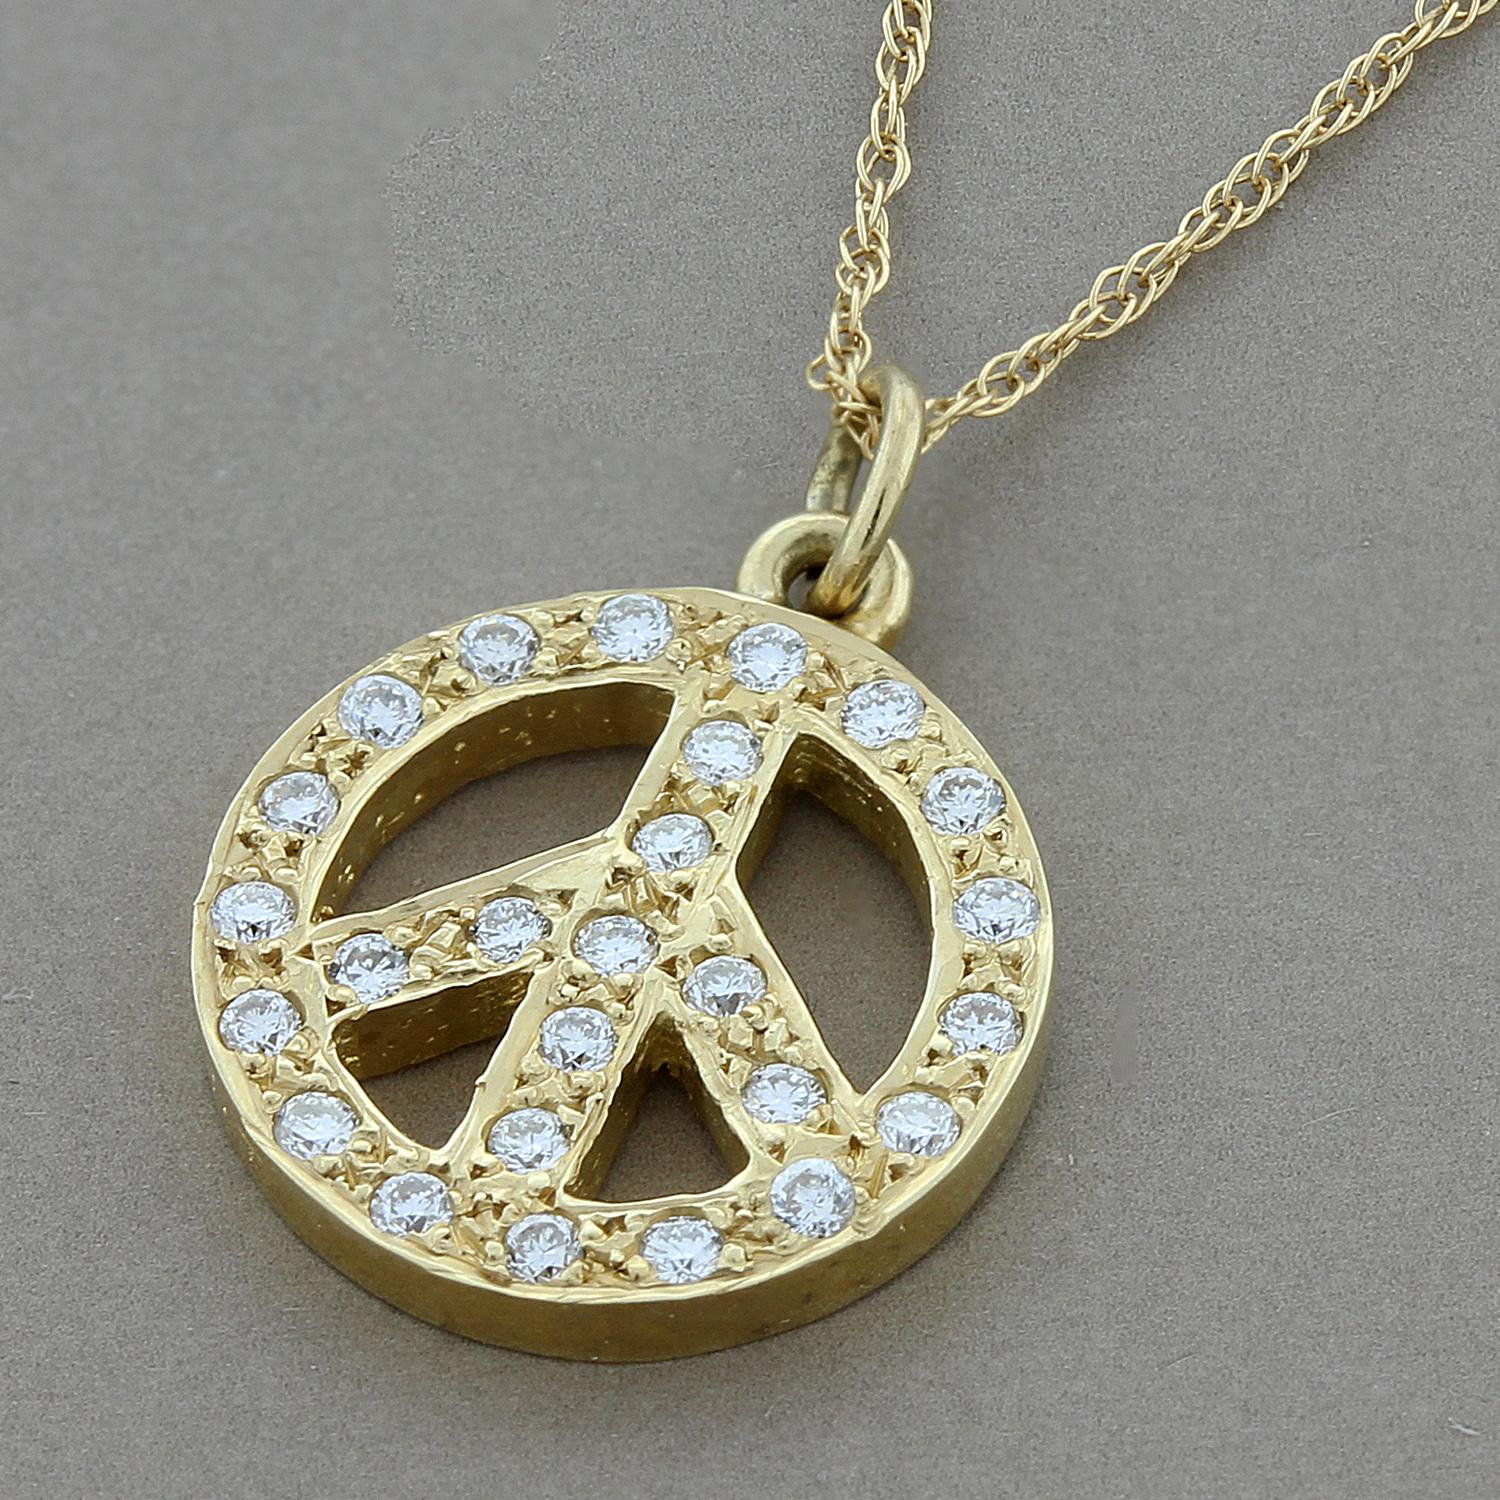 A classic peace sign pendant featuring 0.20 carats of diamonds. Set in 14K yellow gold. Peace out!

Chain Length: 18 inches

Pendant Length: 5/8 inch

Pendant Width: ½ inch